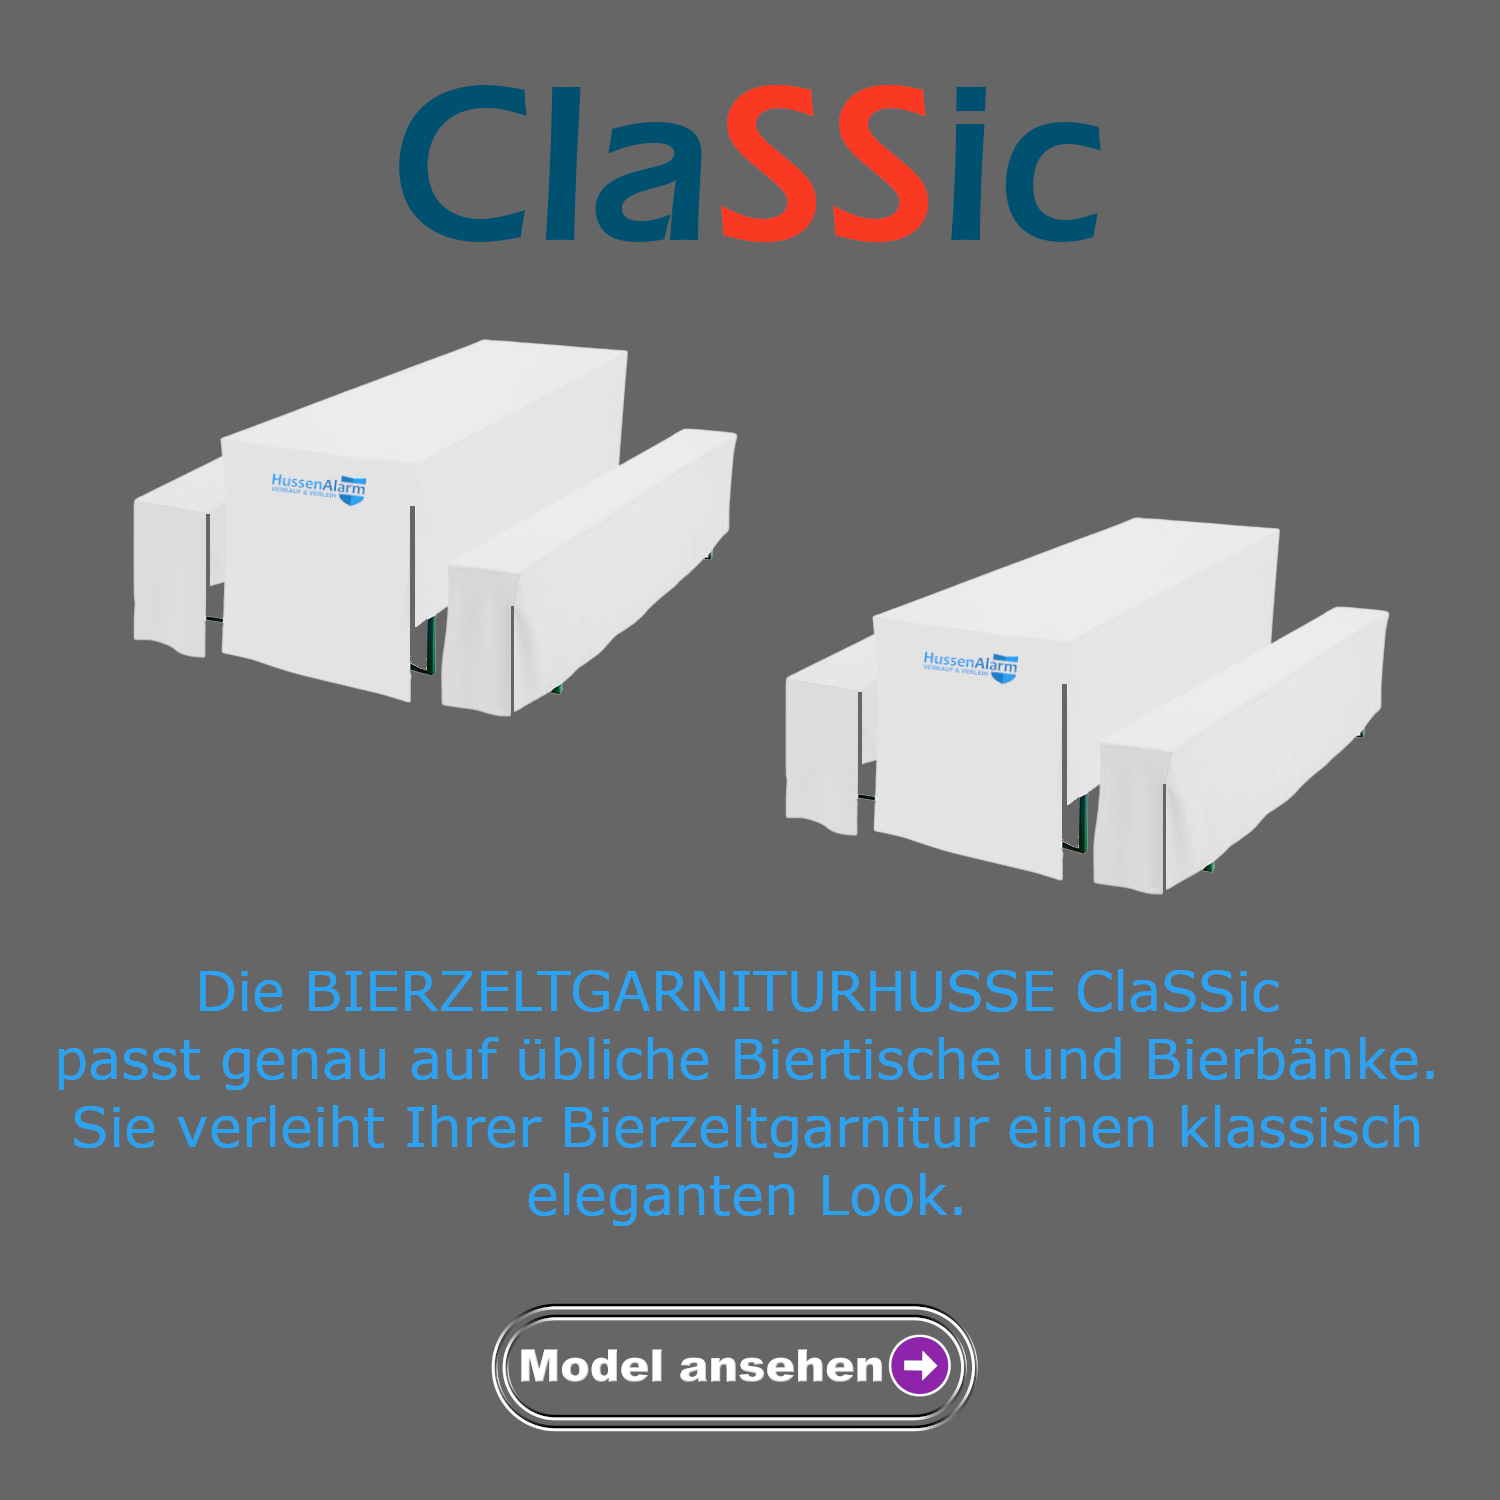 images/bier-classic-box-10.png#joomlaImage://local-images/bier-classic-box-10.png?width=1500&height=1500